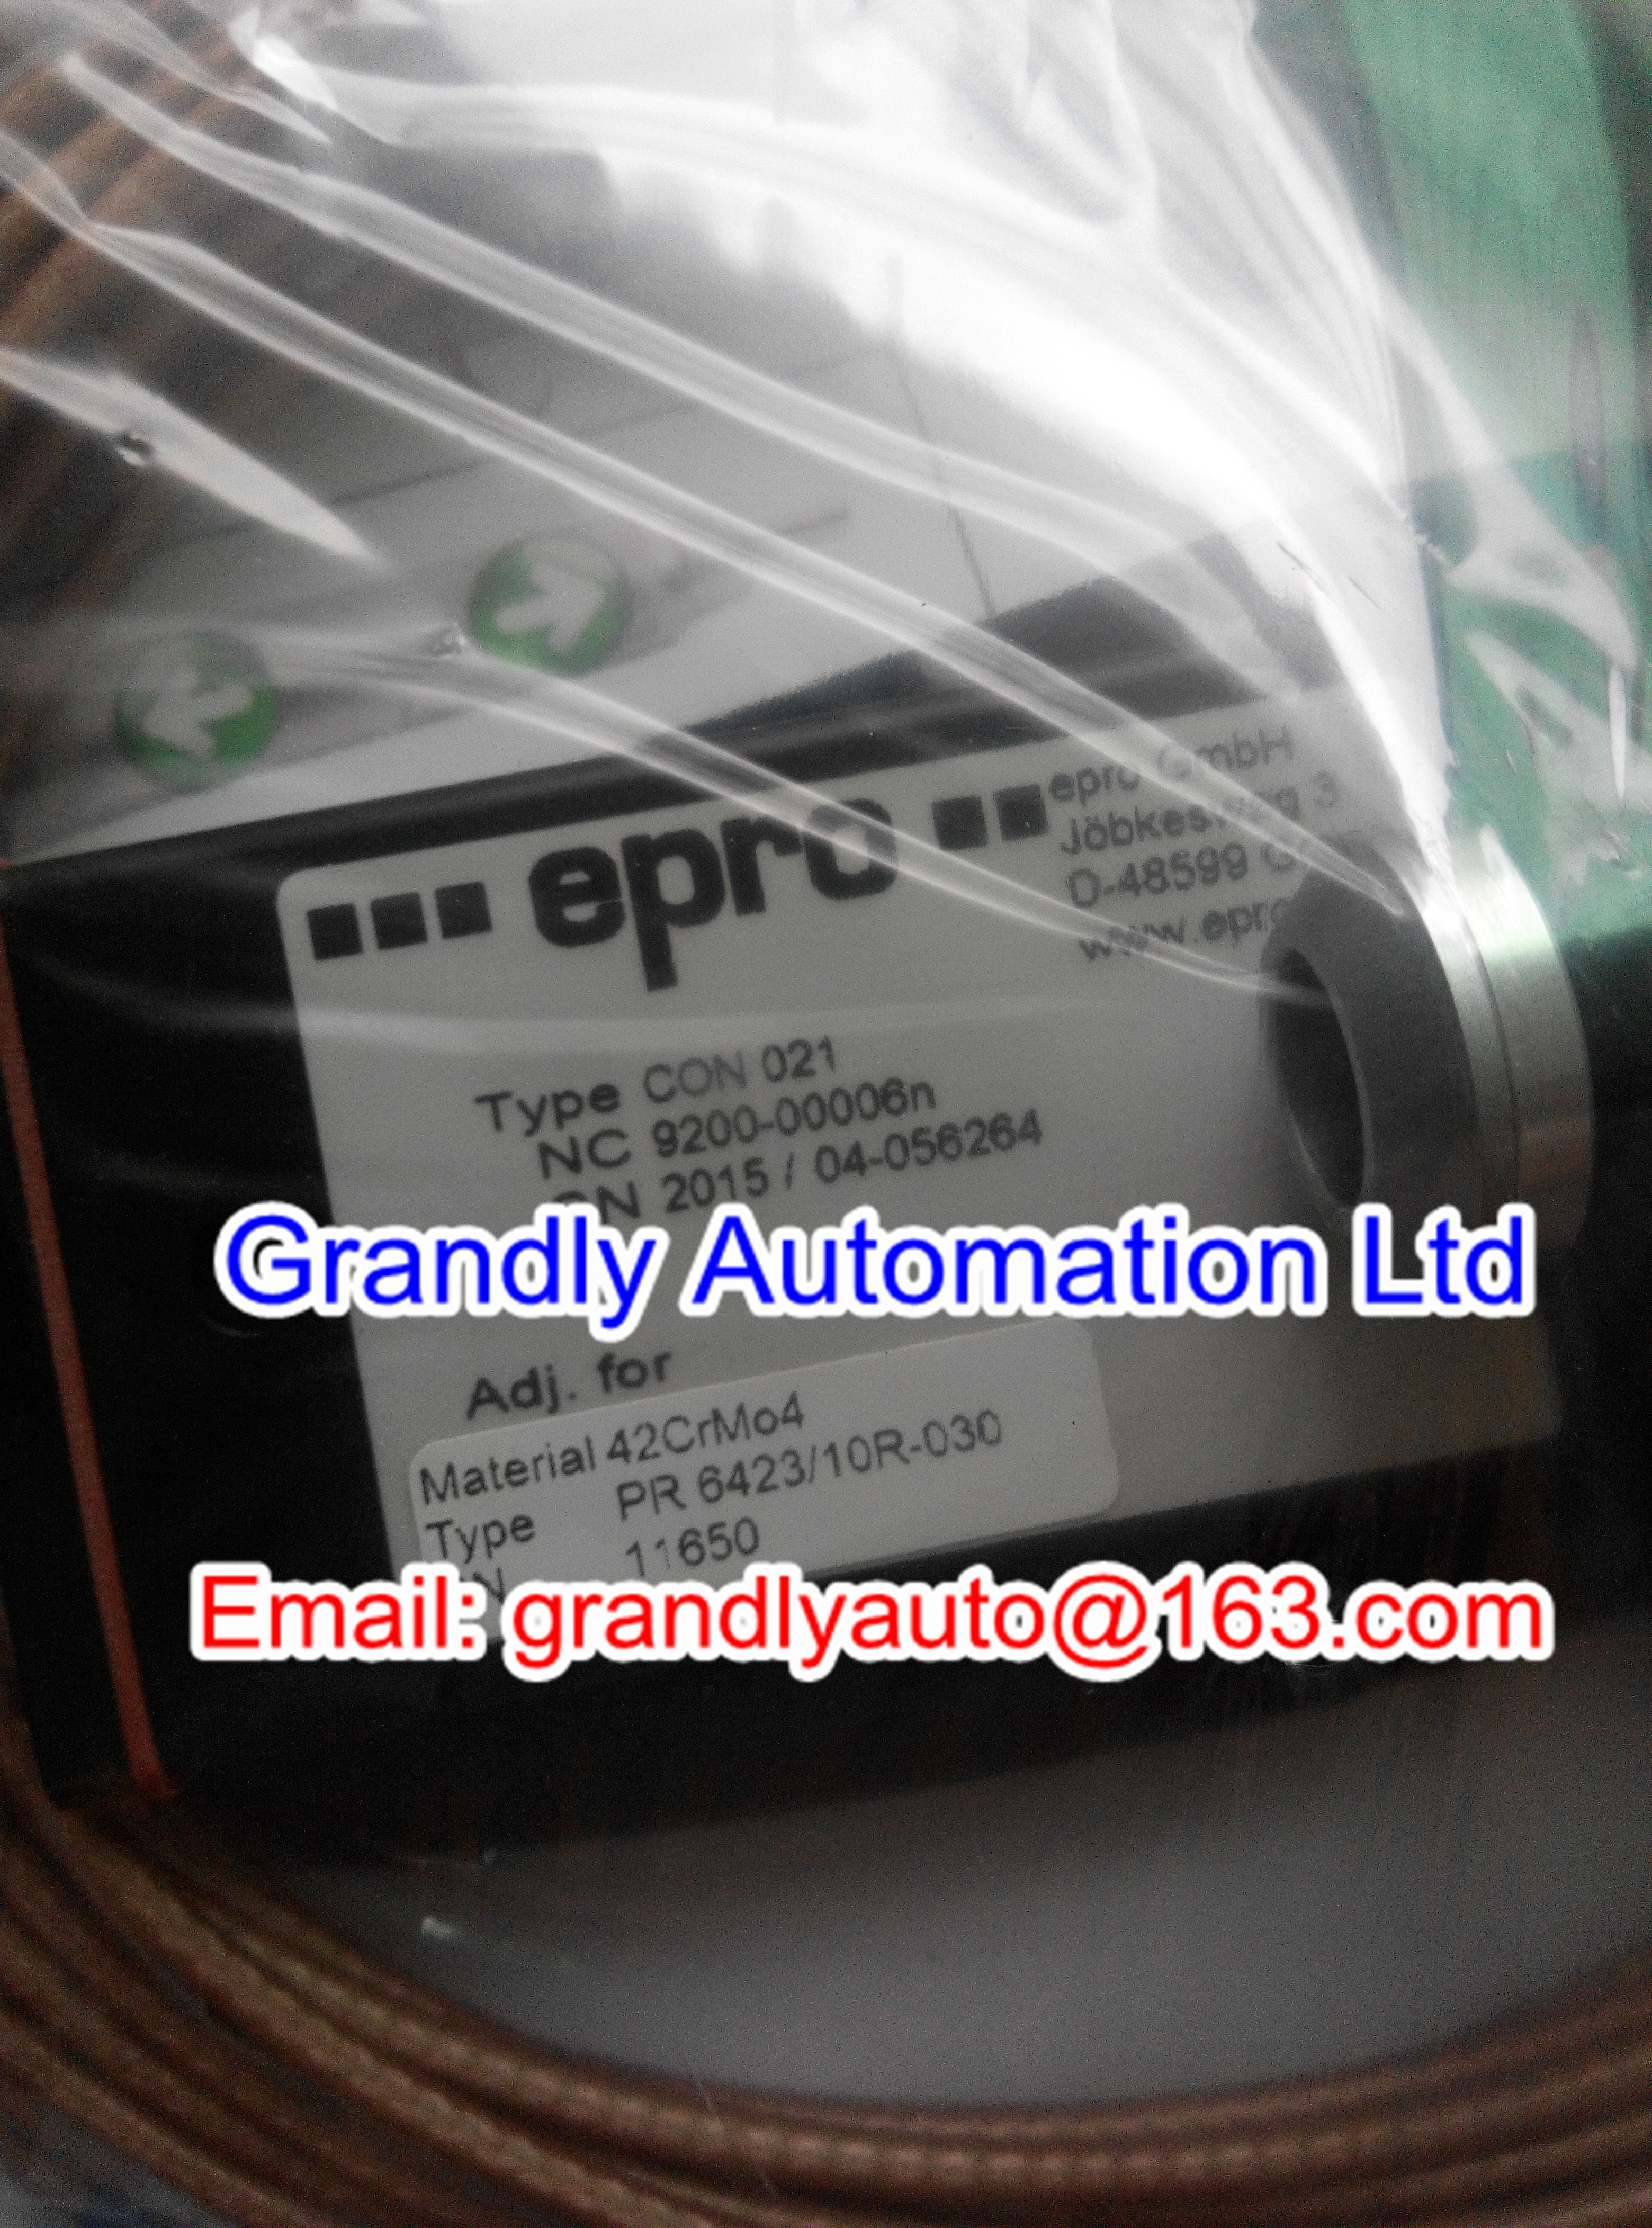 Selling Lead for EPRO UES 815S in stock - Grandly Automation Ltd